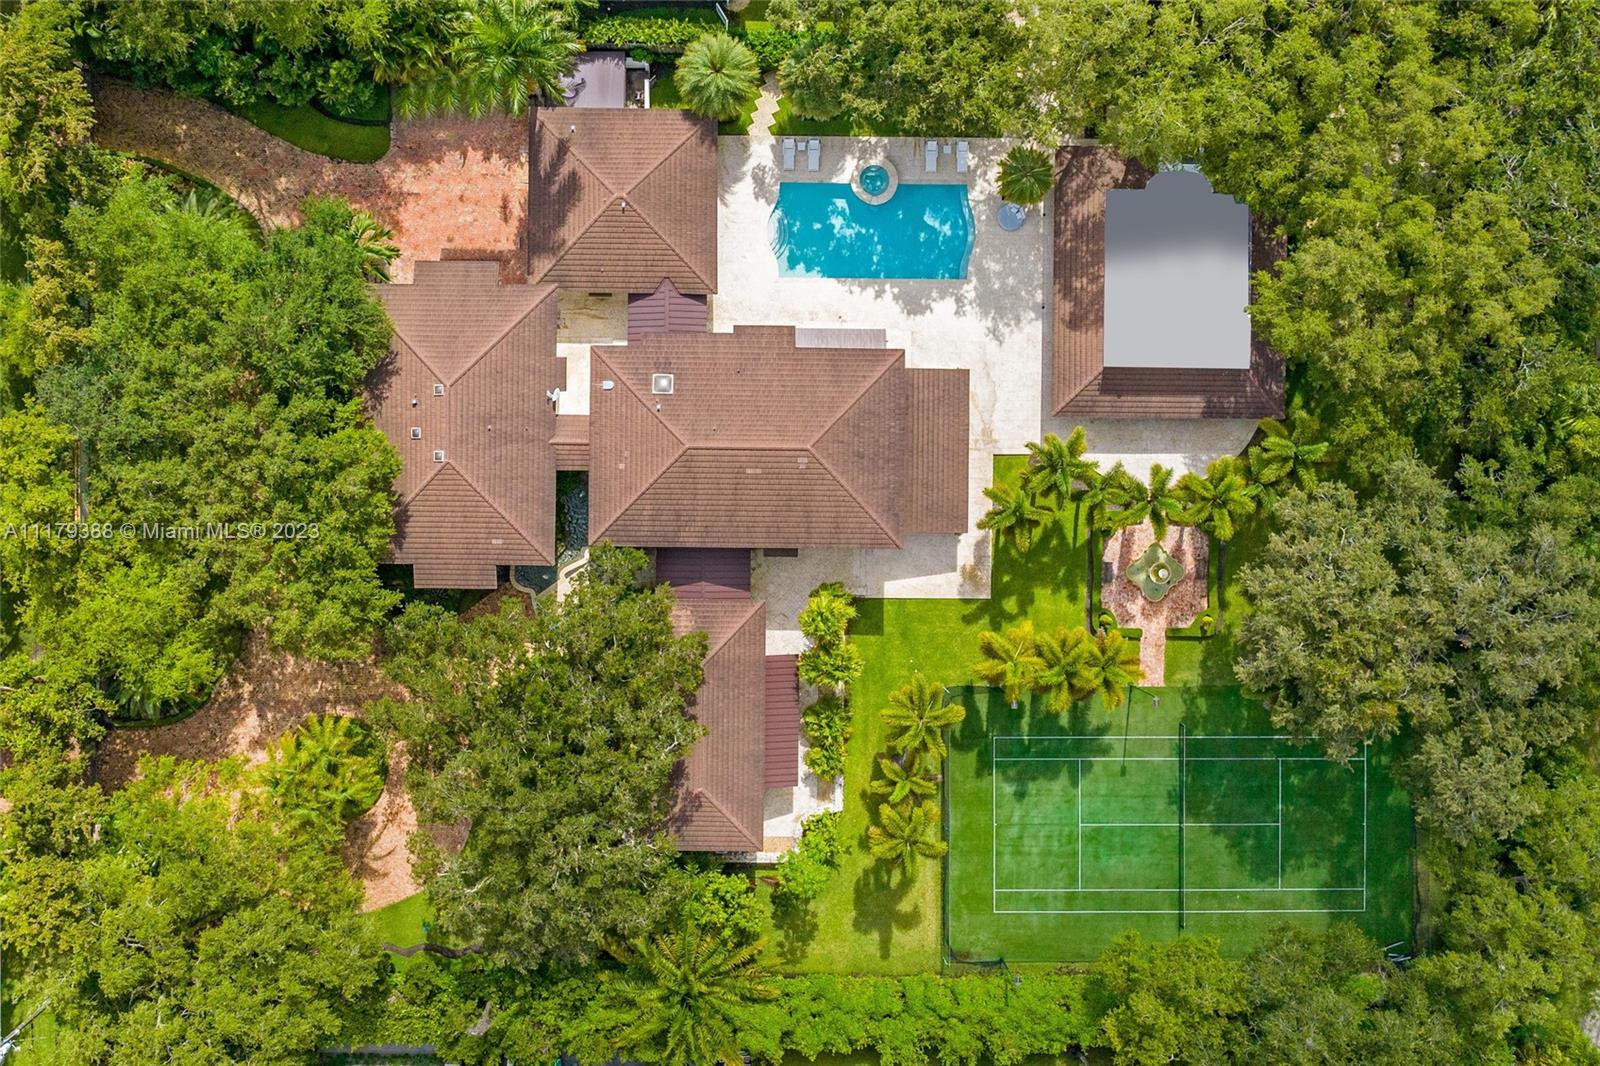 A rarely available 1.5 +/-acre property in the much sought-after Ponce Davis area presents an ideal opportunity for luxurious family living. This 7 bedroom , 8 full baths and 2 half bath property has not only a main house, but two additional properties on this estate: a guest house/ pool cabana and a large recreational house, complete with full bath, summer kitchen and an expansive covered patio for large scale entertaining. Perfectly sited to the side of the property is a lighted tennis court, providing the perfect location for a family’s tennis enthusiasts. The main house has not only two master suites, one on the ground level and one on the second level, but it also includes an expansive family room overlooking the pool and tennis court, a spectacular kitchen and much more.